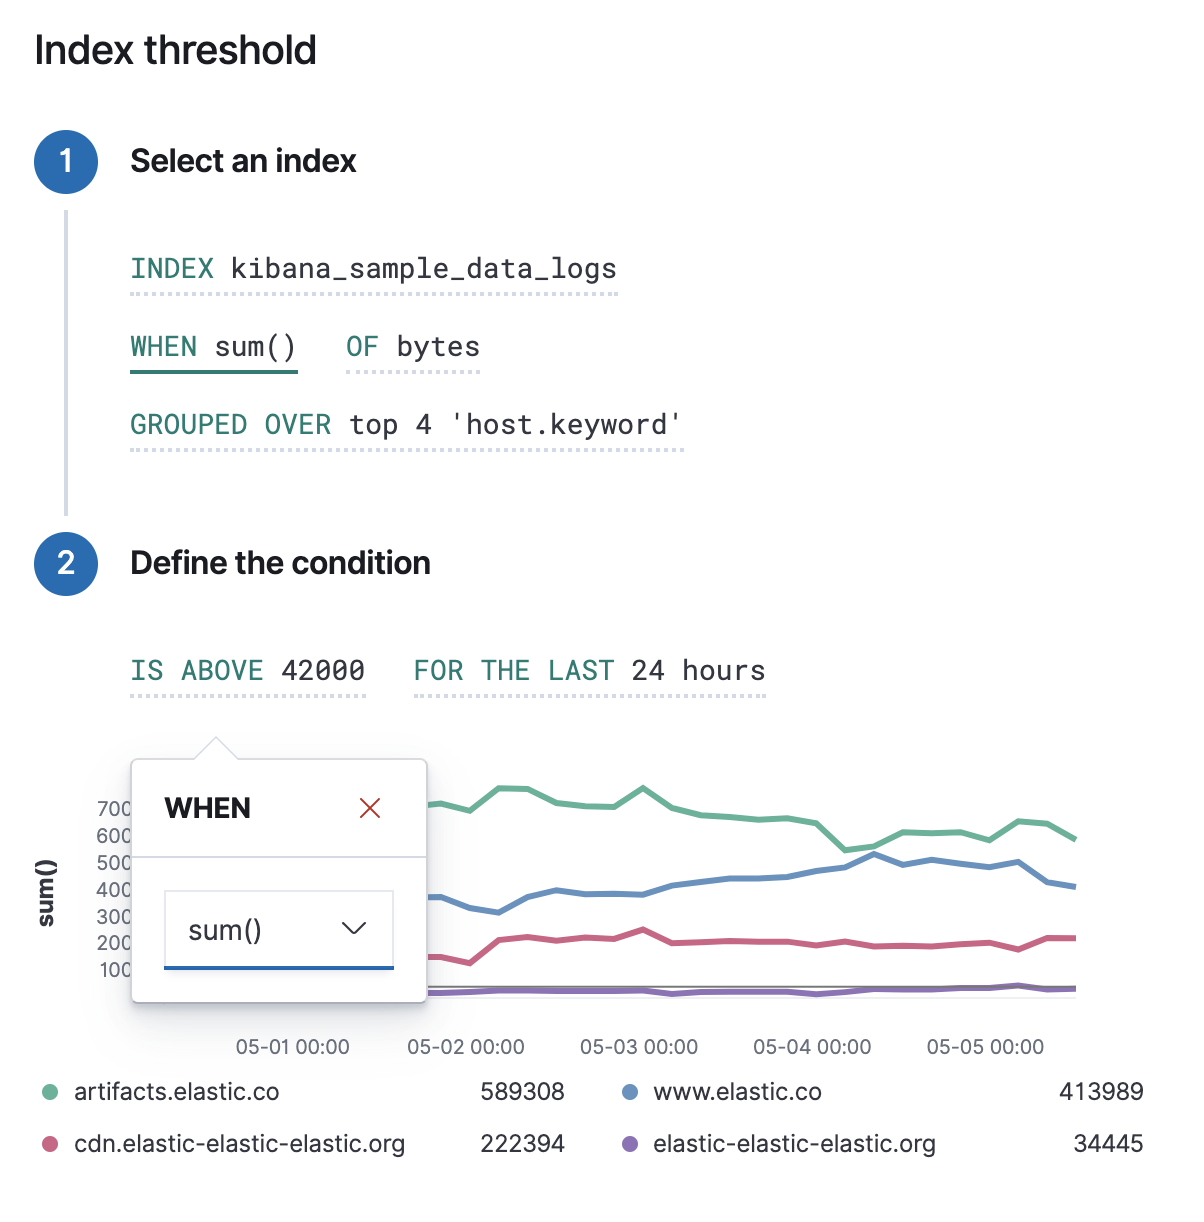 UI for defining alert conditions on an index threshold alert